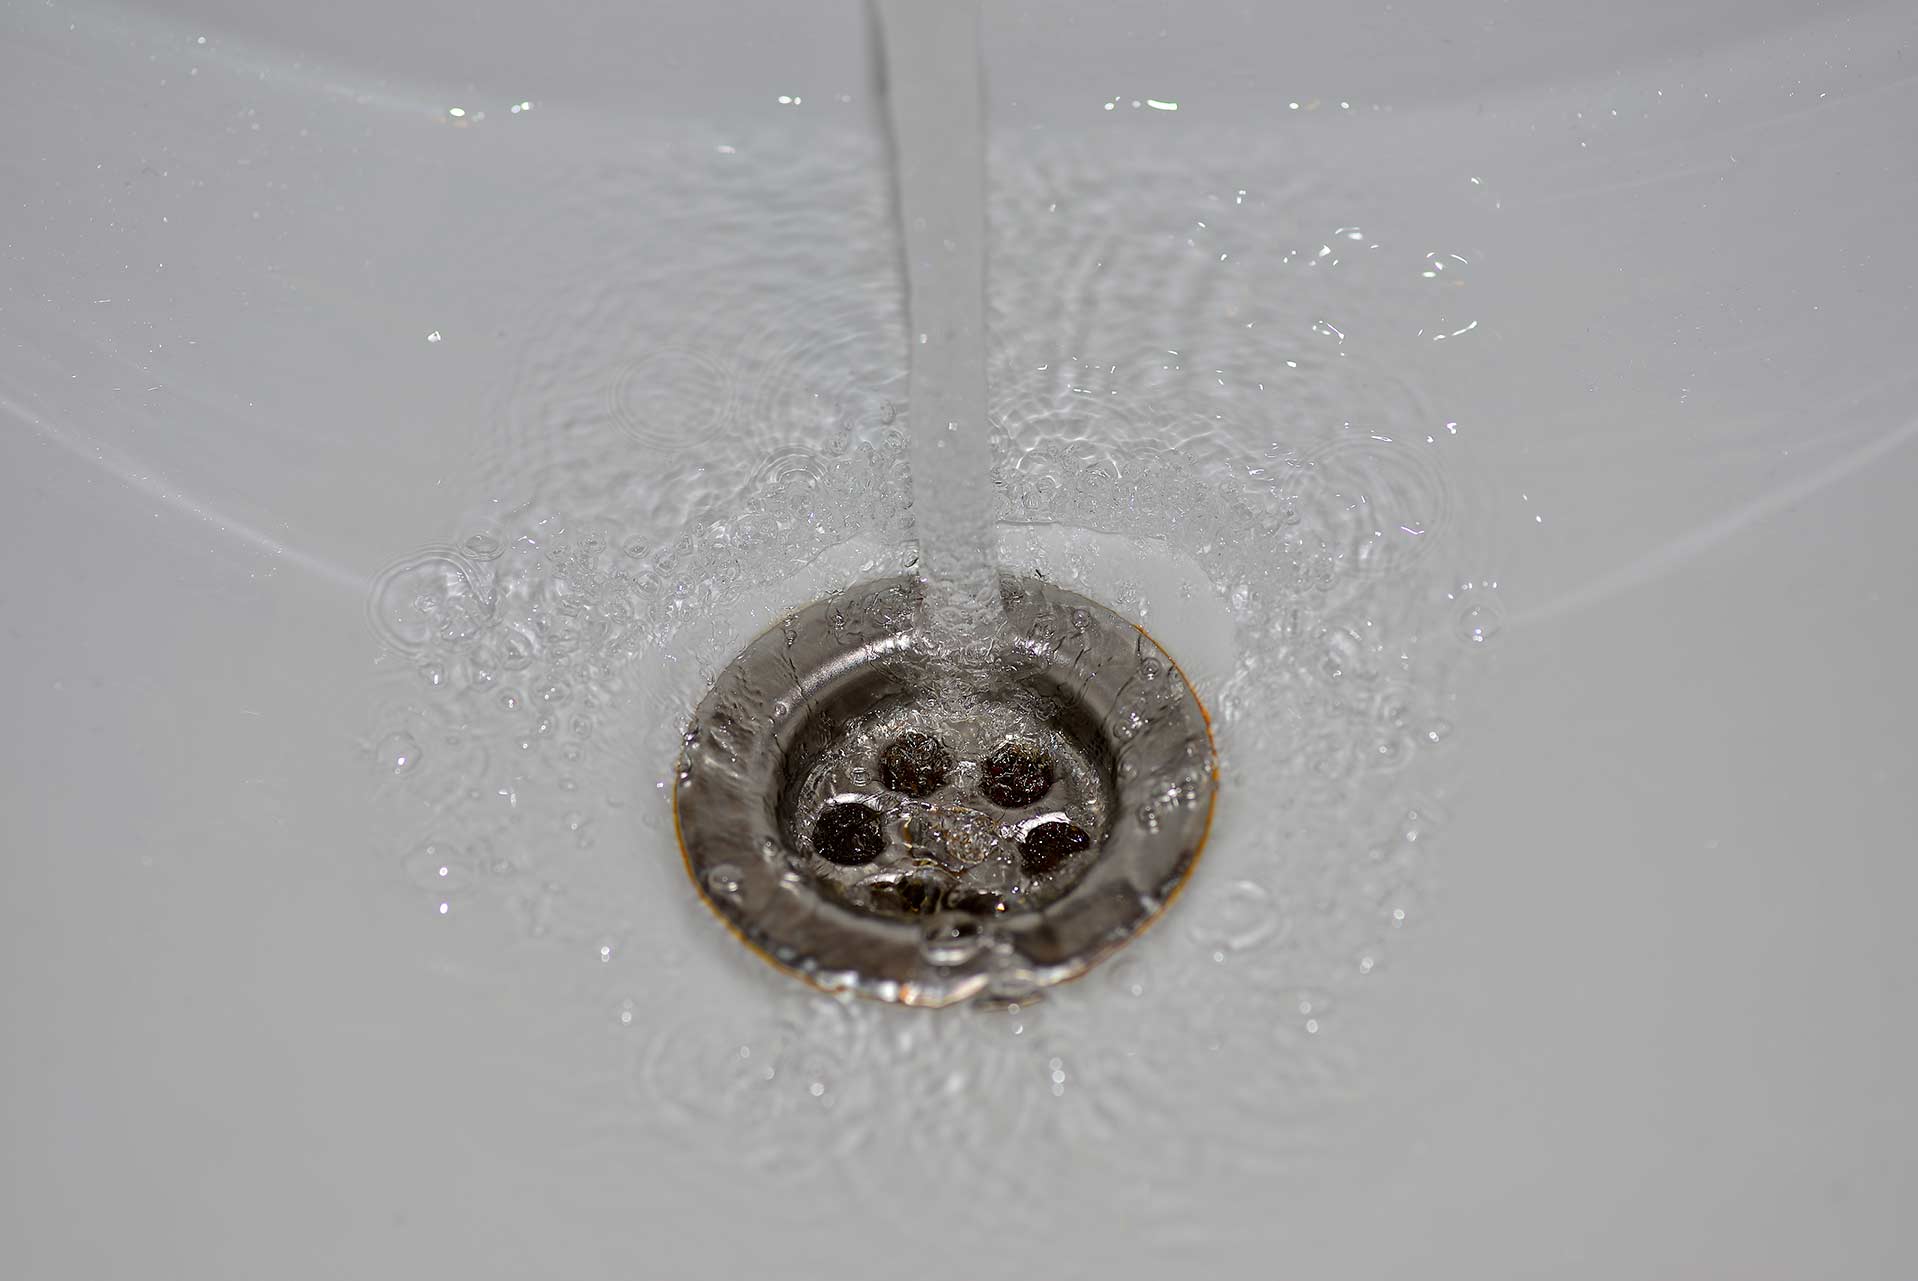 A2B Drains provides services to unblock blocked sinks and drains for properties in Crawley.